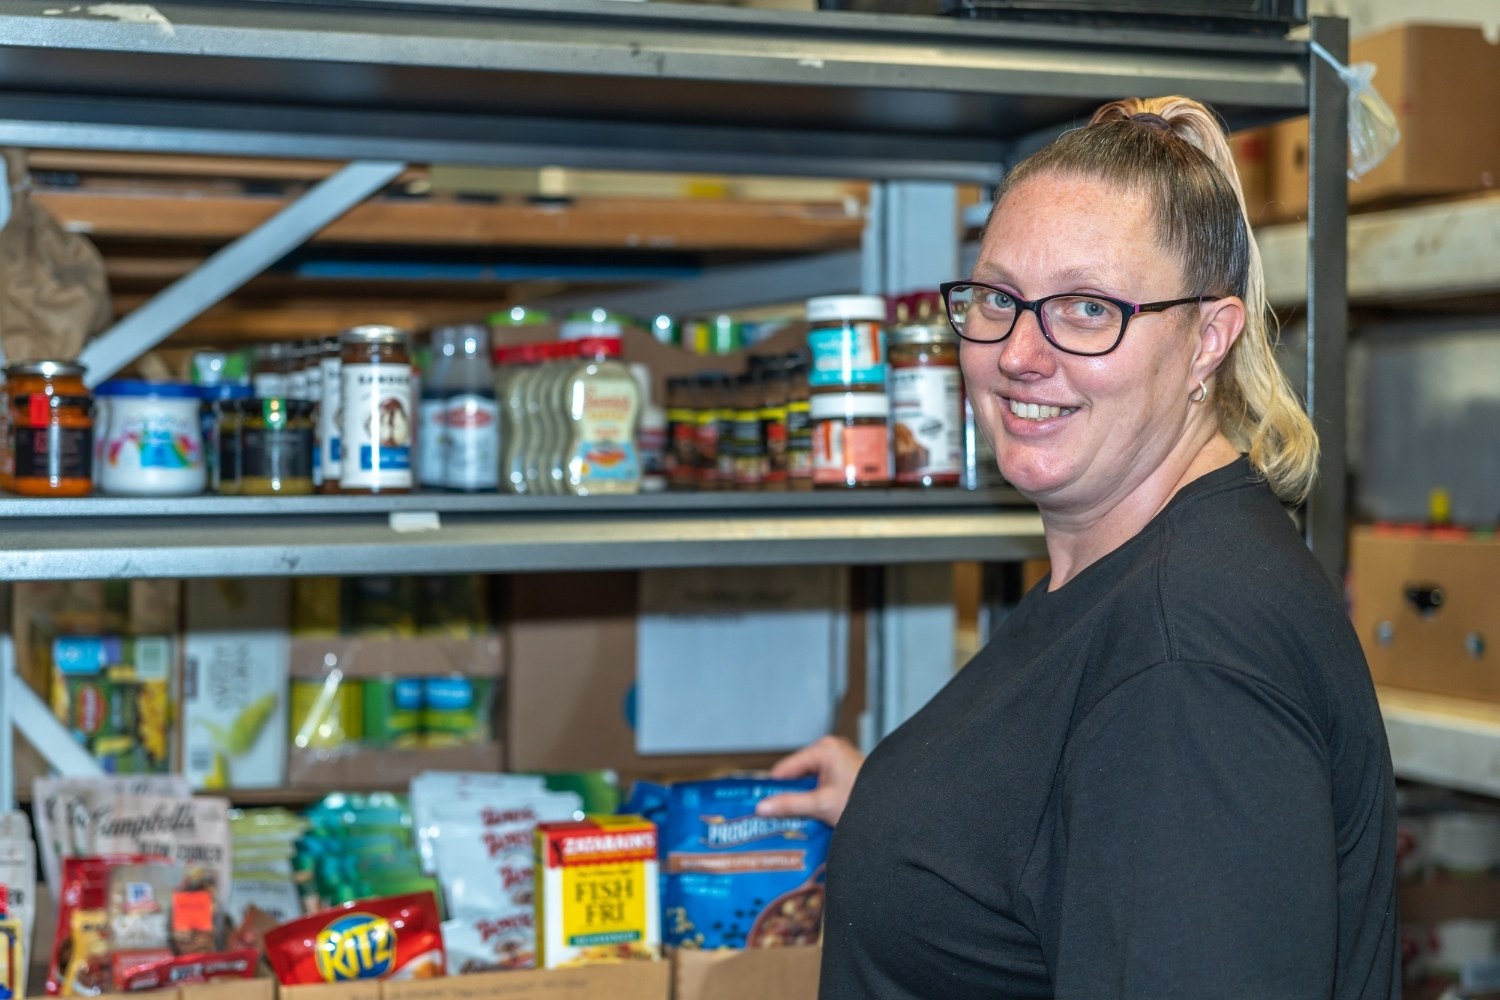 LifePath pantry supervisor strives to know each guest by name